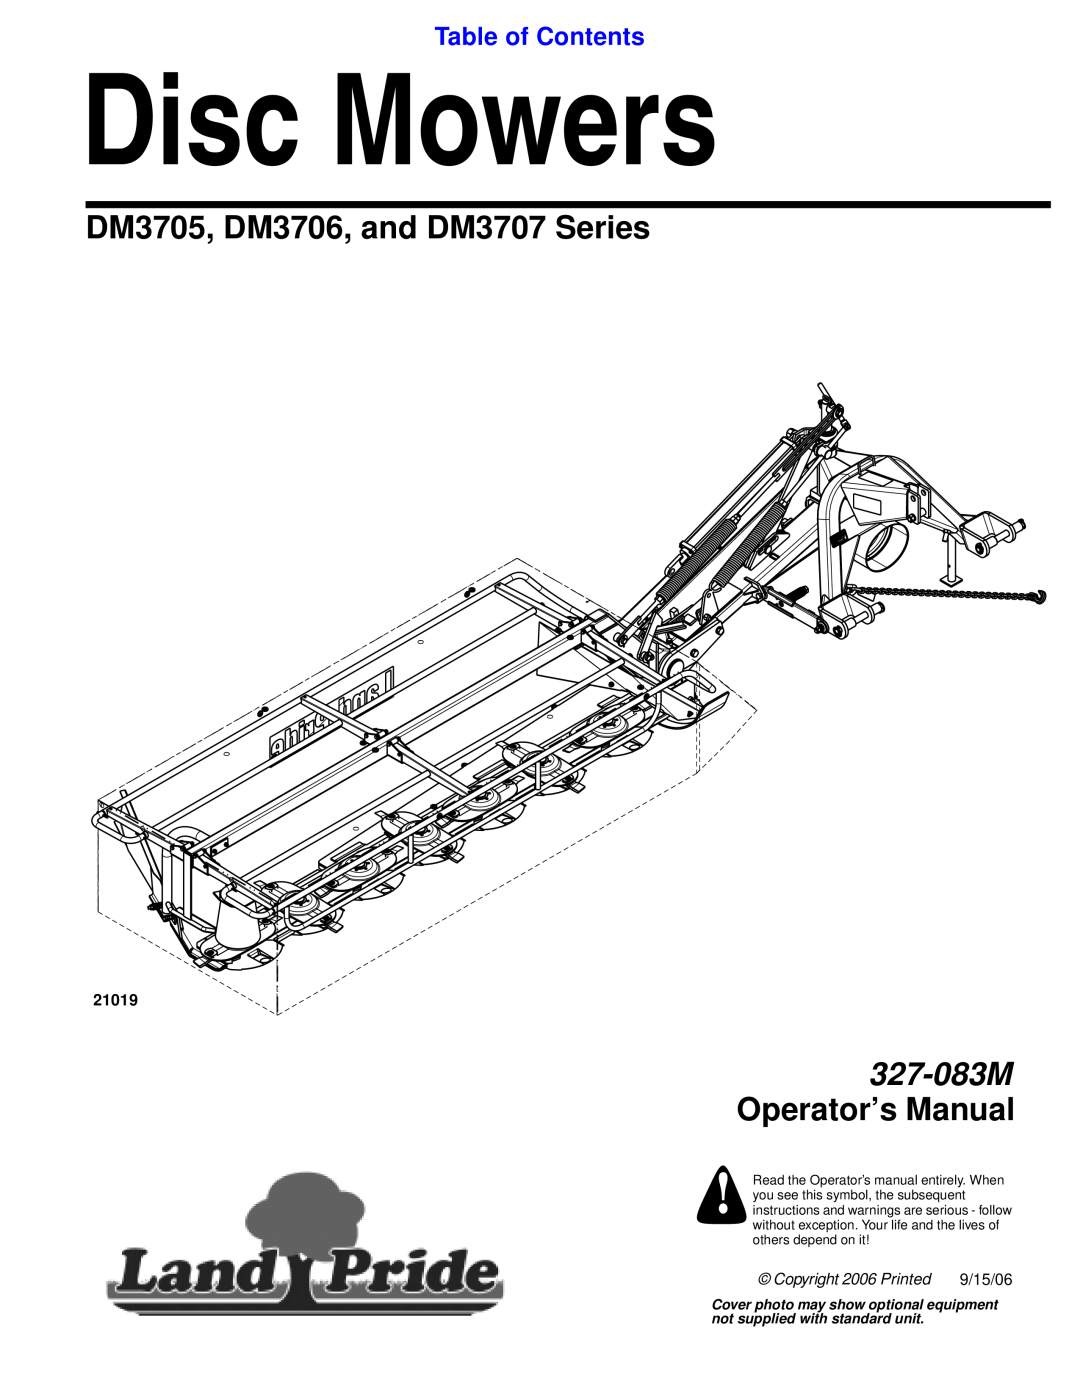 Land Pride DM3706 Series manual DM3705, DM3706, and DM3707 Series, Table of Contents, Disc Mowers, Copyright 2006 Pr inted 